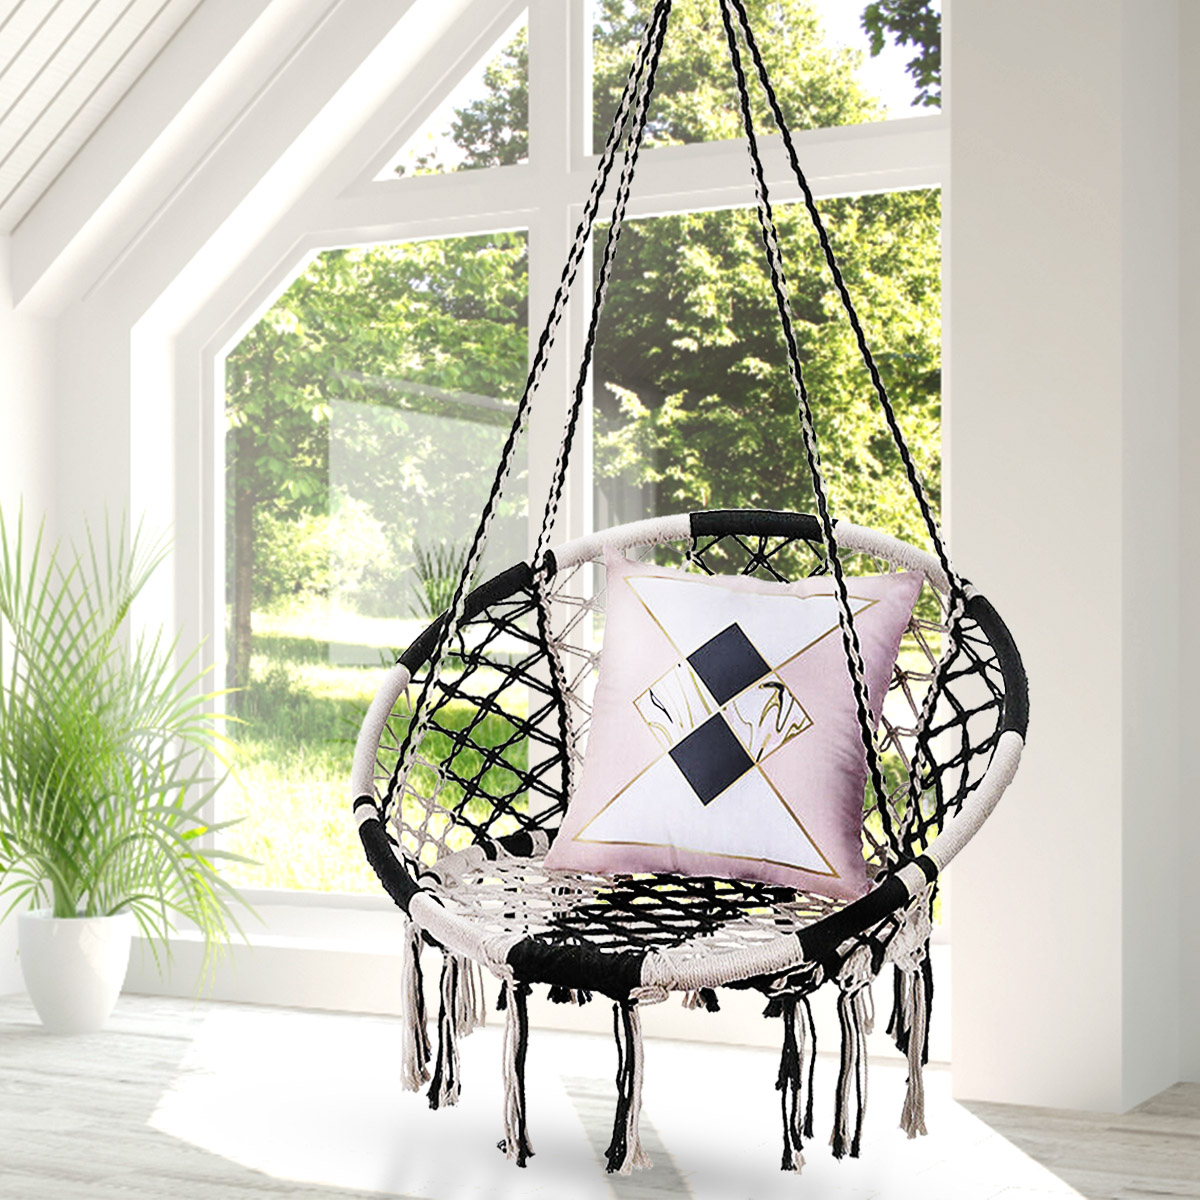 Hanging Hammock Chair Mesh Woven Rope Macrame Bar Chair Swing for Indoor/ Outdoor/ Home/ Bedroom/ Patio/ Yard/ Deck/ Garden Chair Seat, Home Decor Christmas Gifts Festival Gift - image 1 of 7